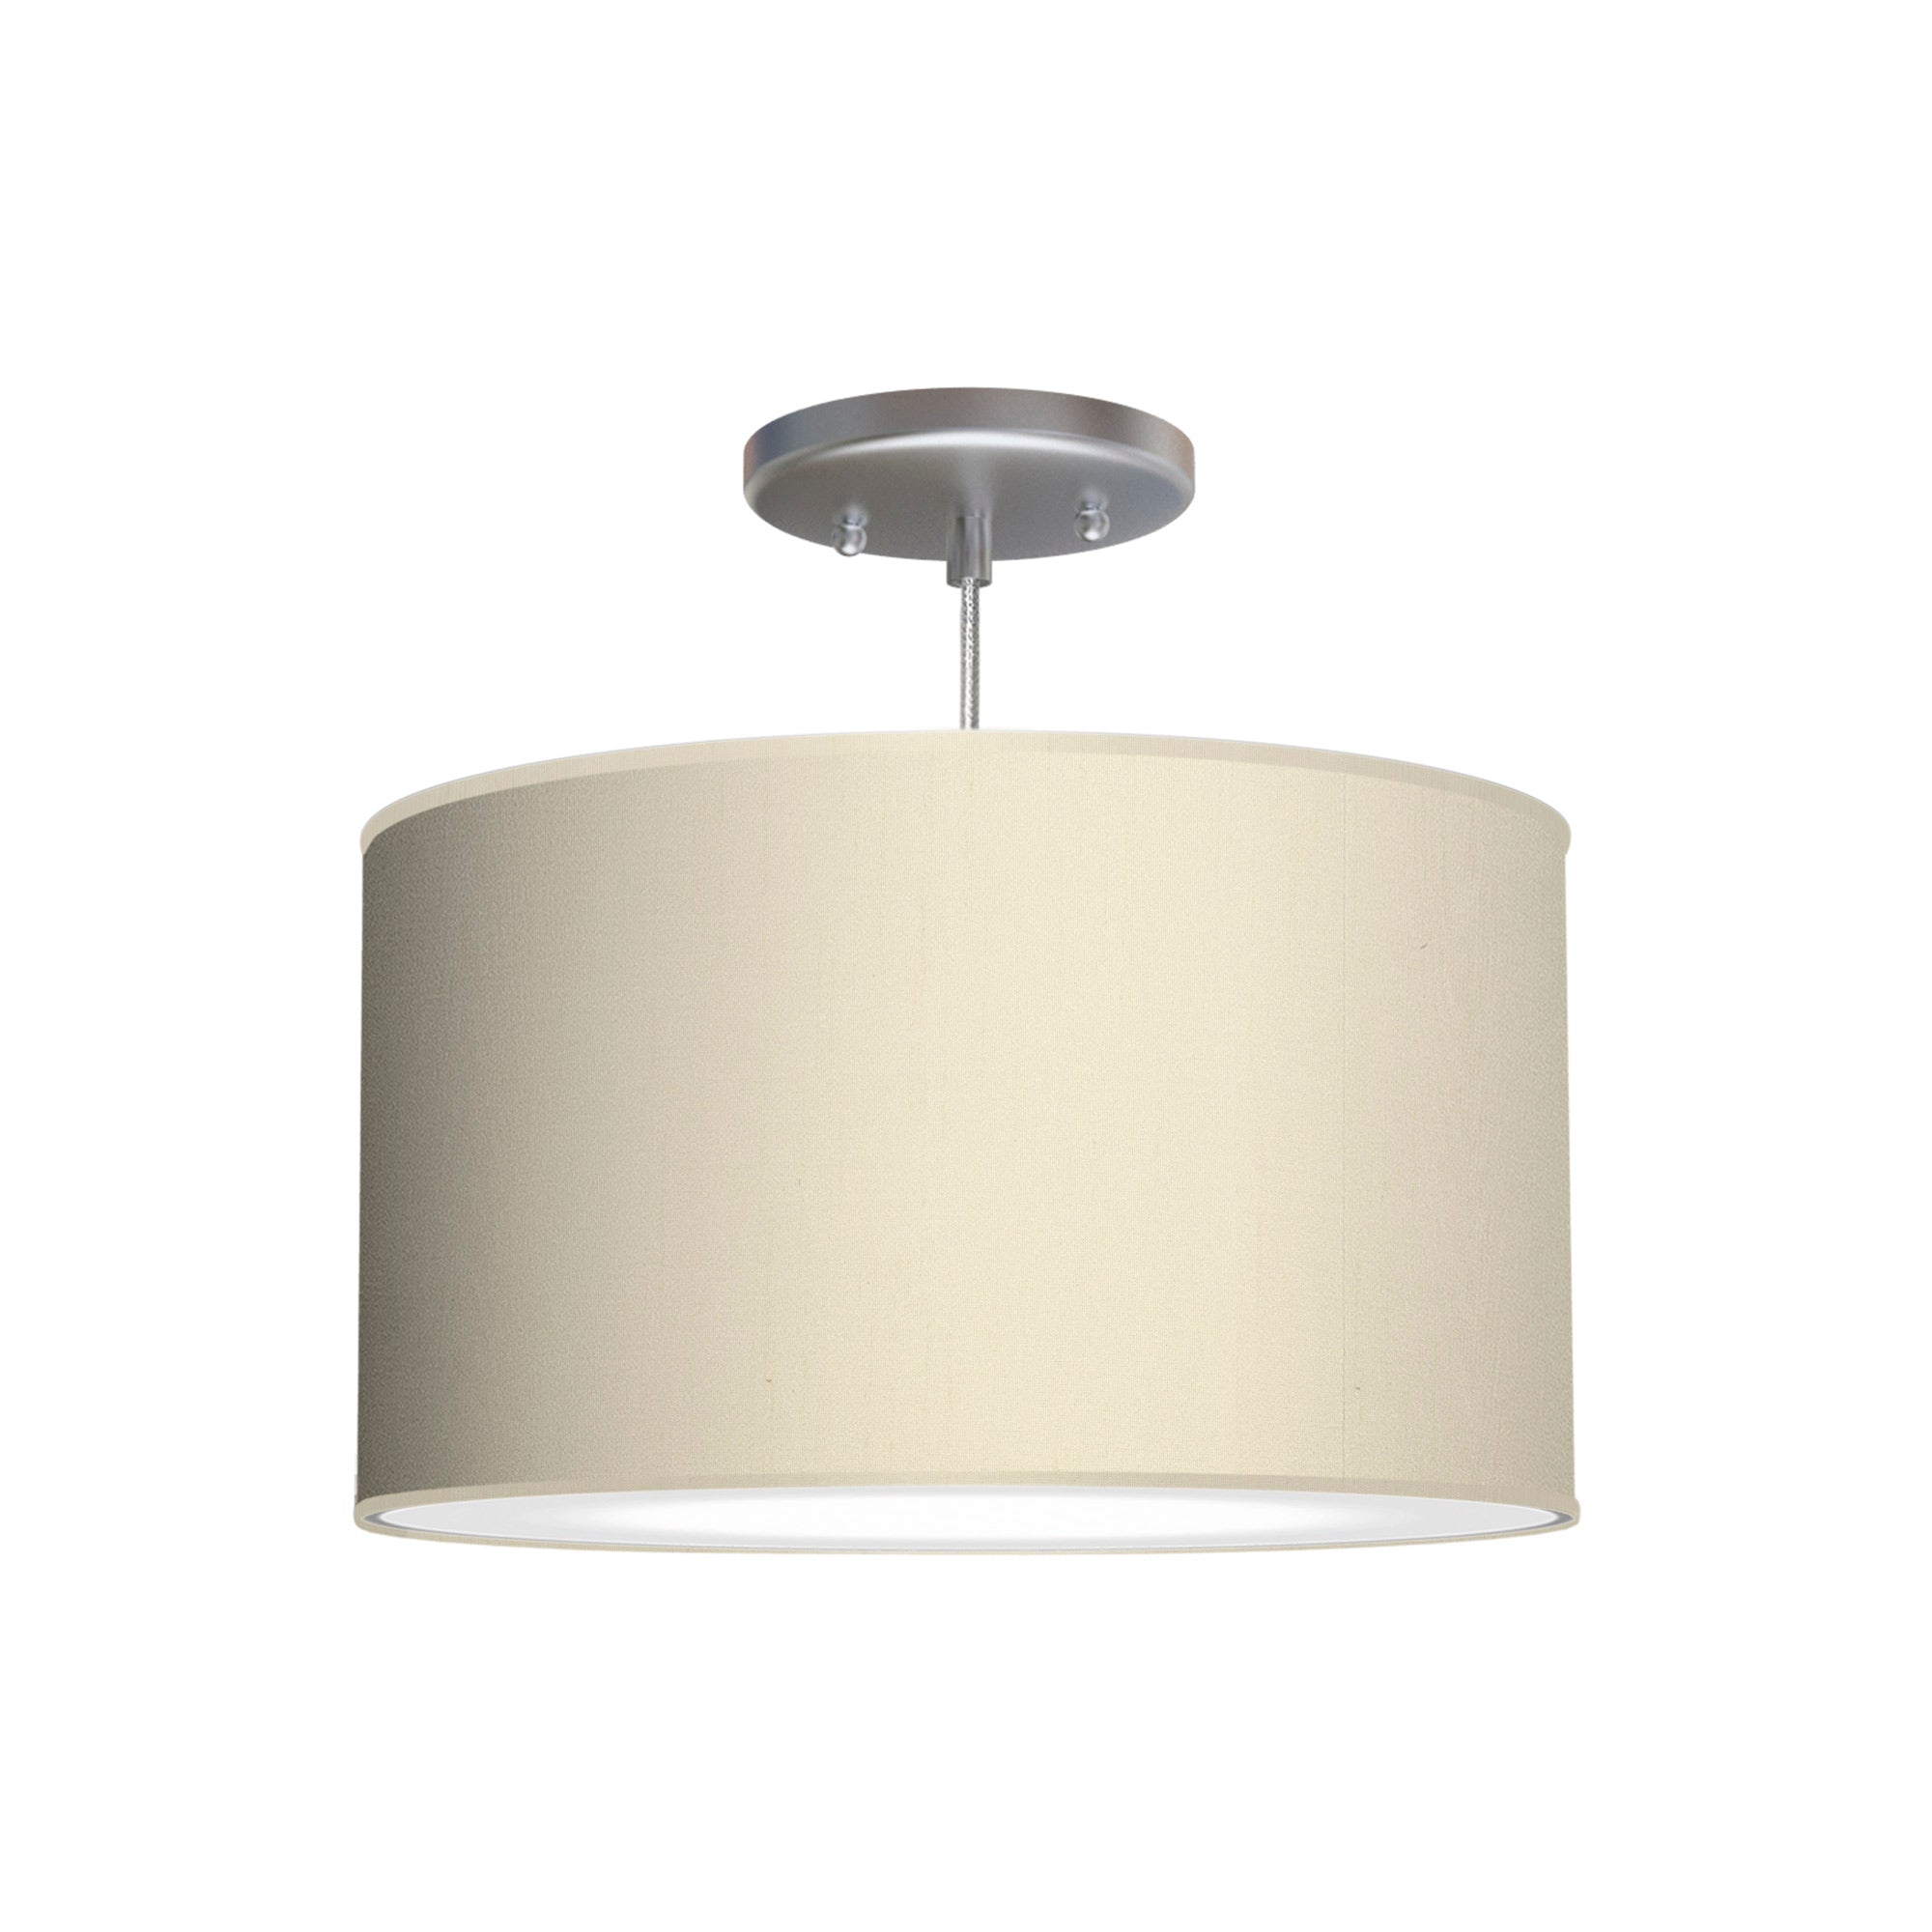 The Gab Hanging Lamp from Seascape Fixtures with a silk shade in cream color.